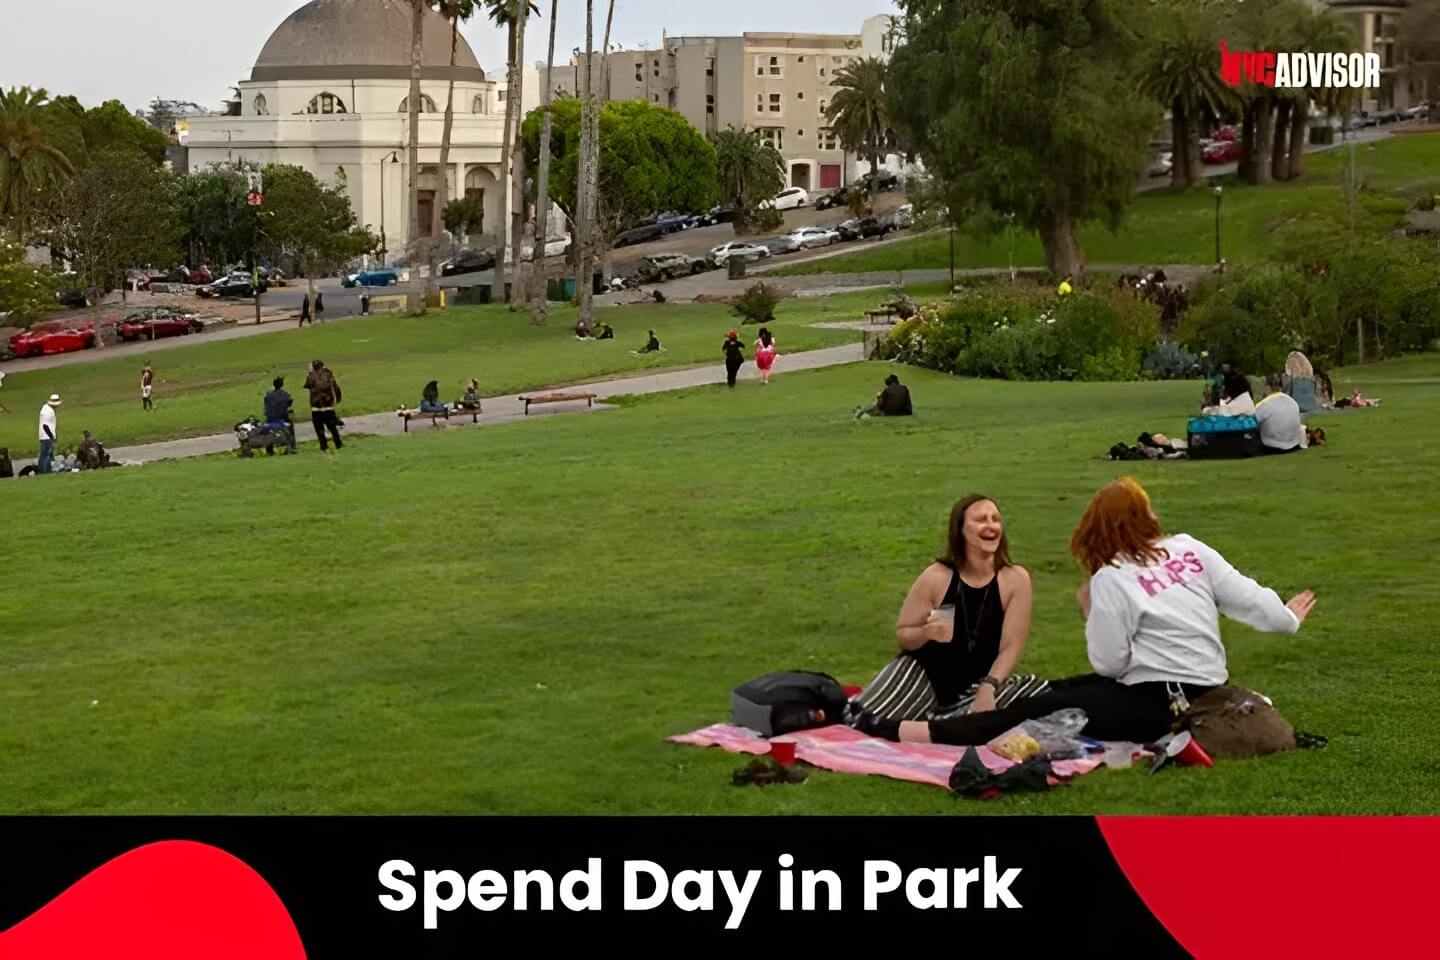 Spend the day to the fullest at a park with exciting activities.